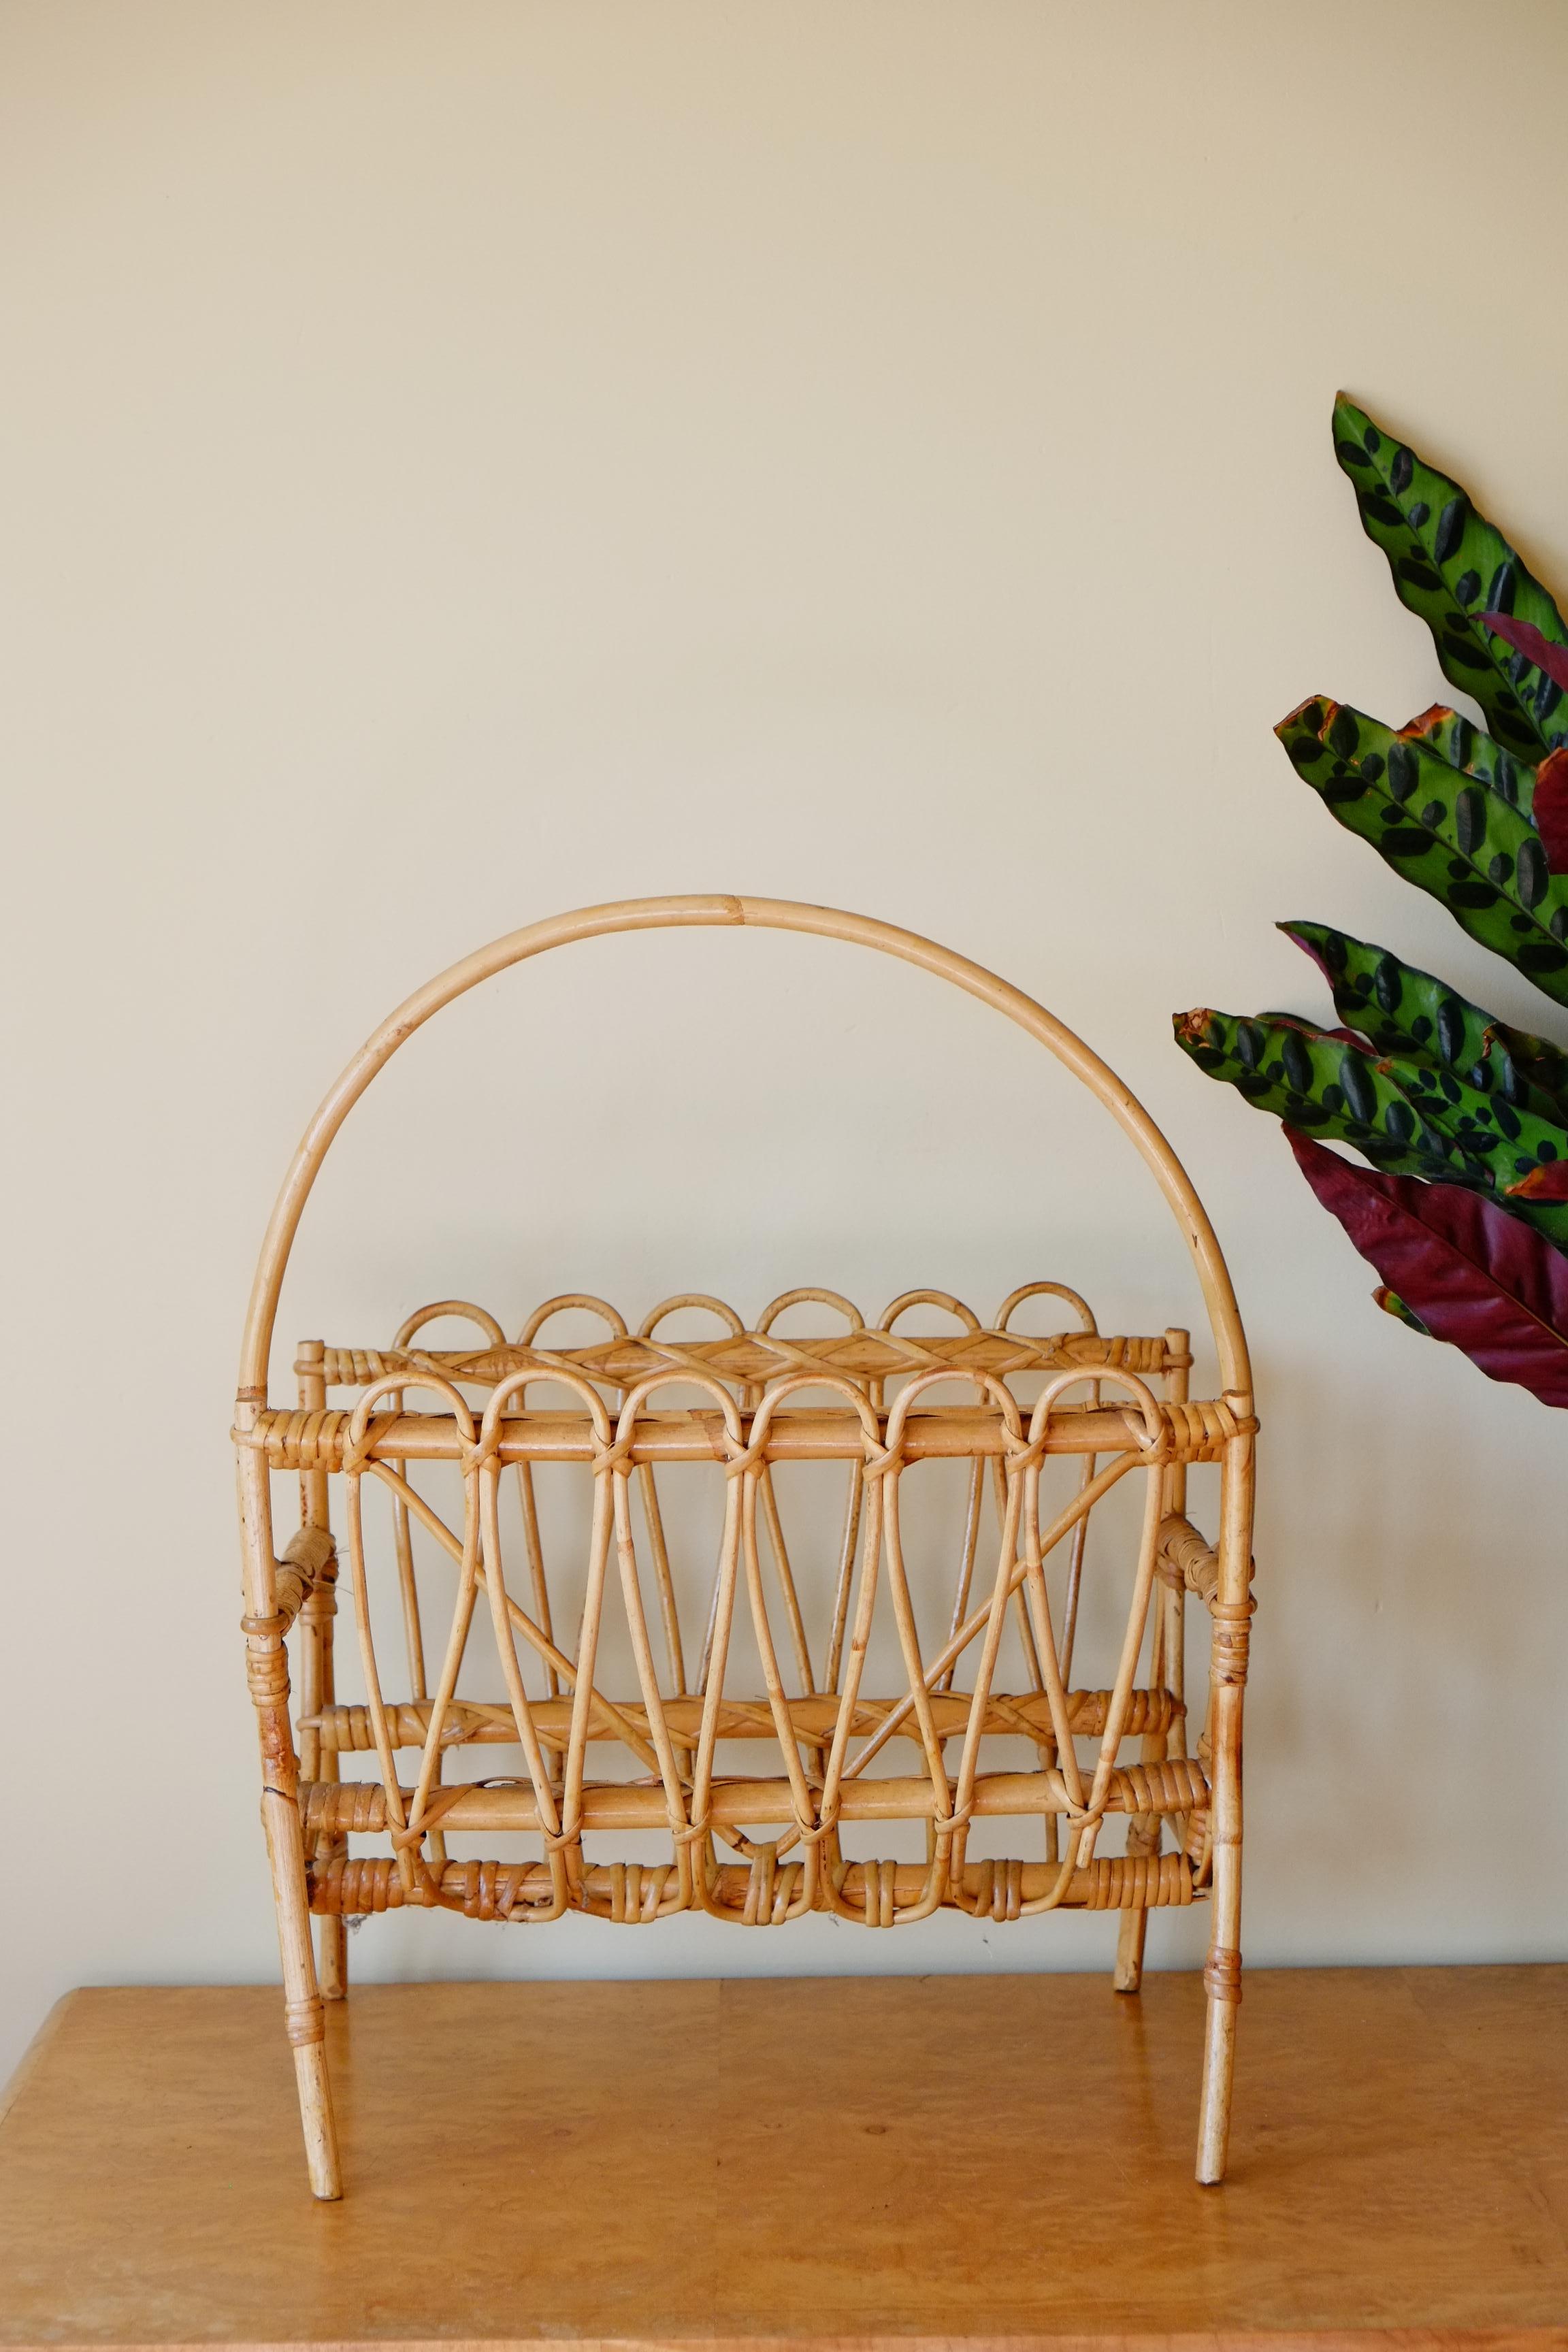 Bamboo Rattan Bohemian Midcentury Magazine Rack In Good Condition For Sale In Leicester, GB